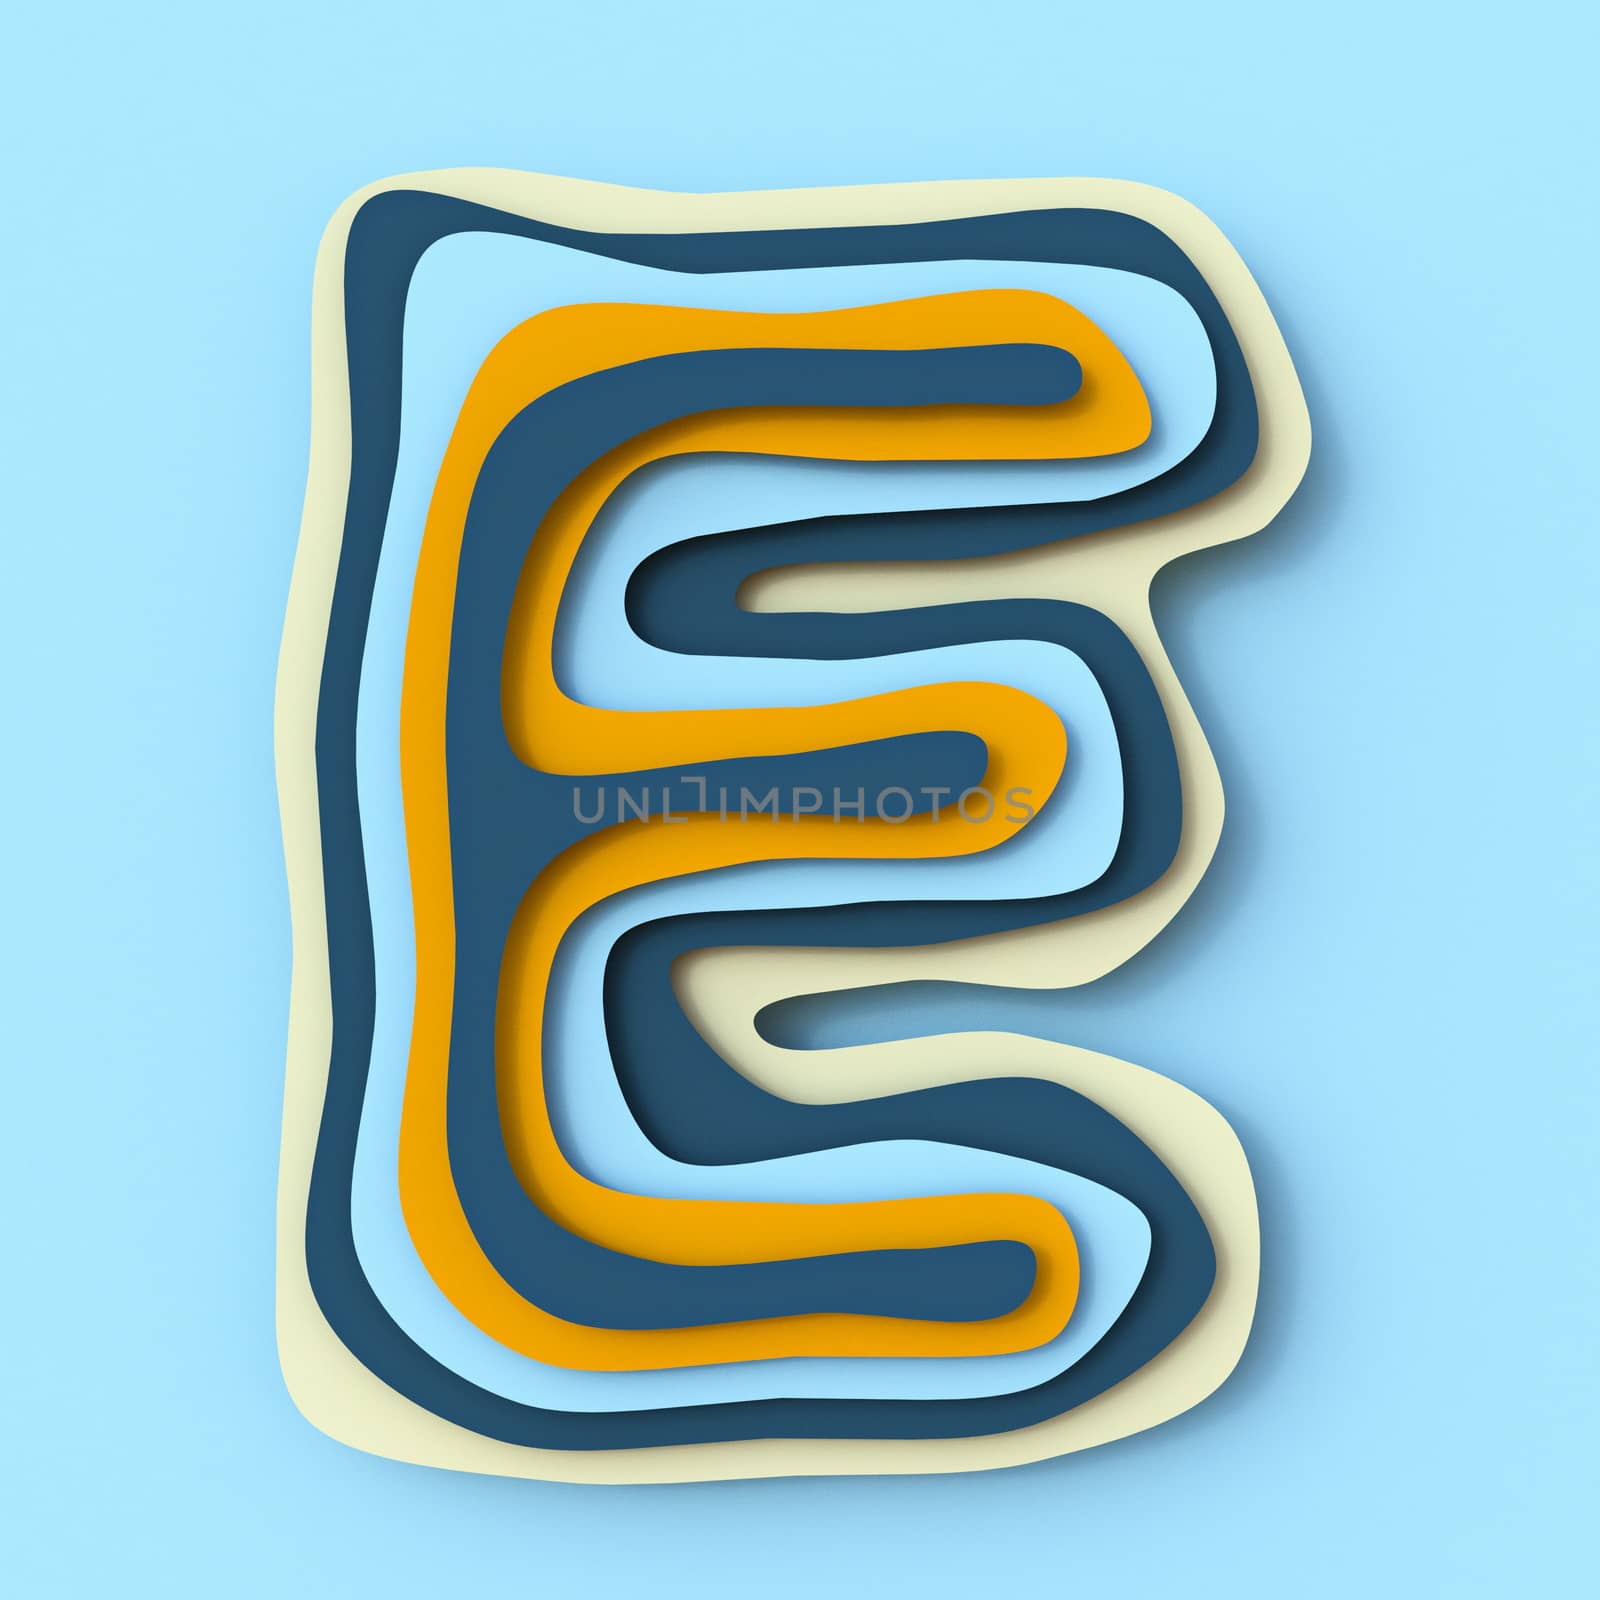 Colorful paper layers font Letter E 3D render illustration isolated on blue background